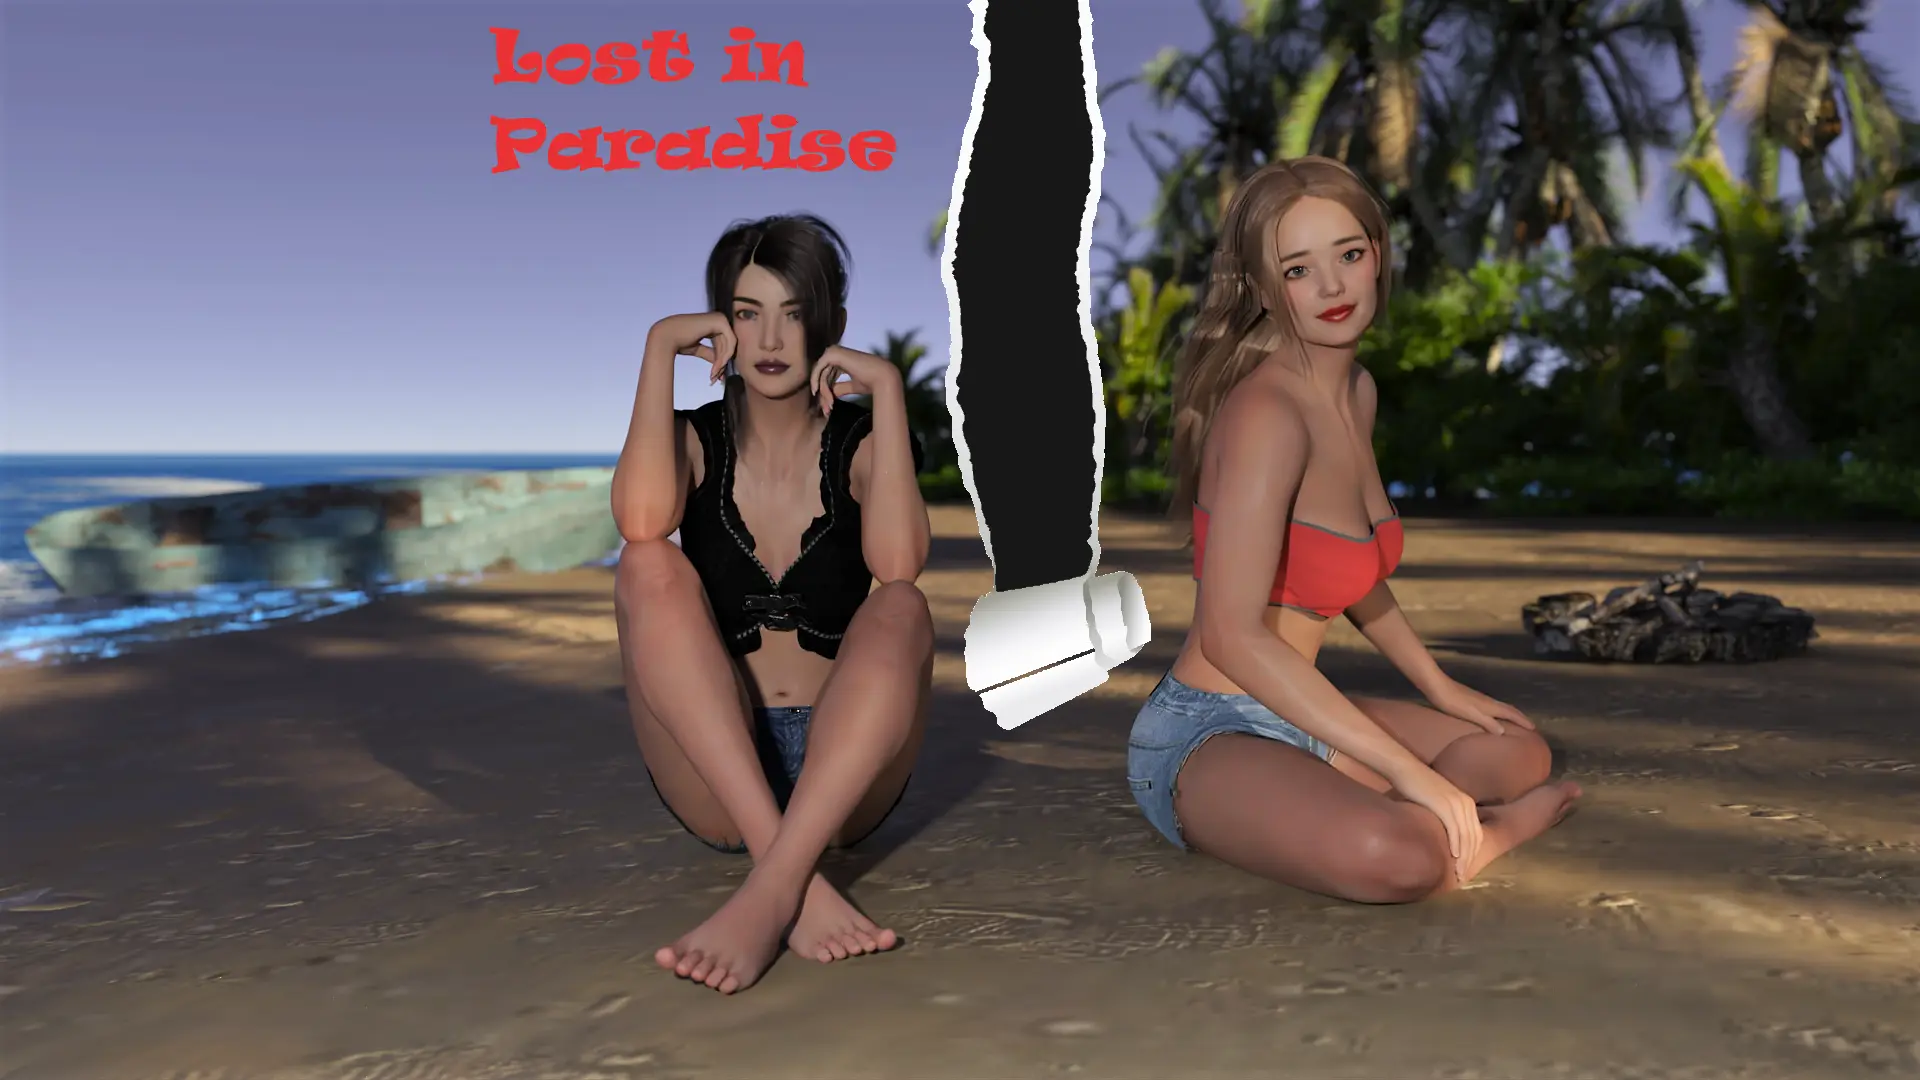 Lost in Paradise main image